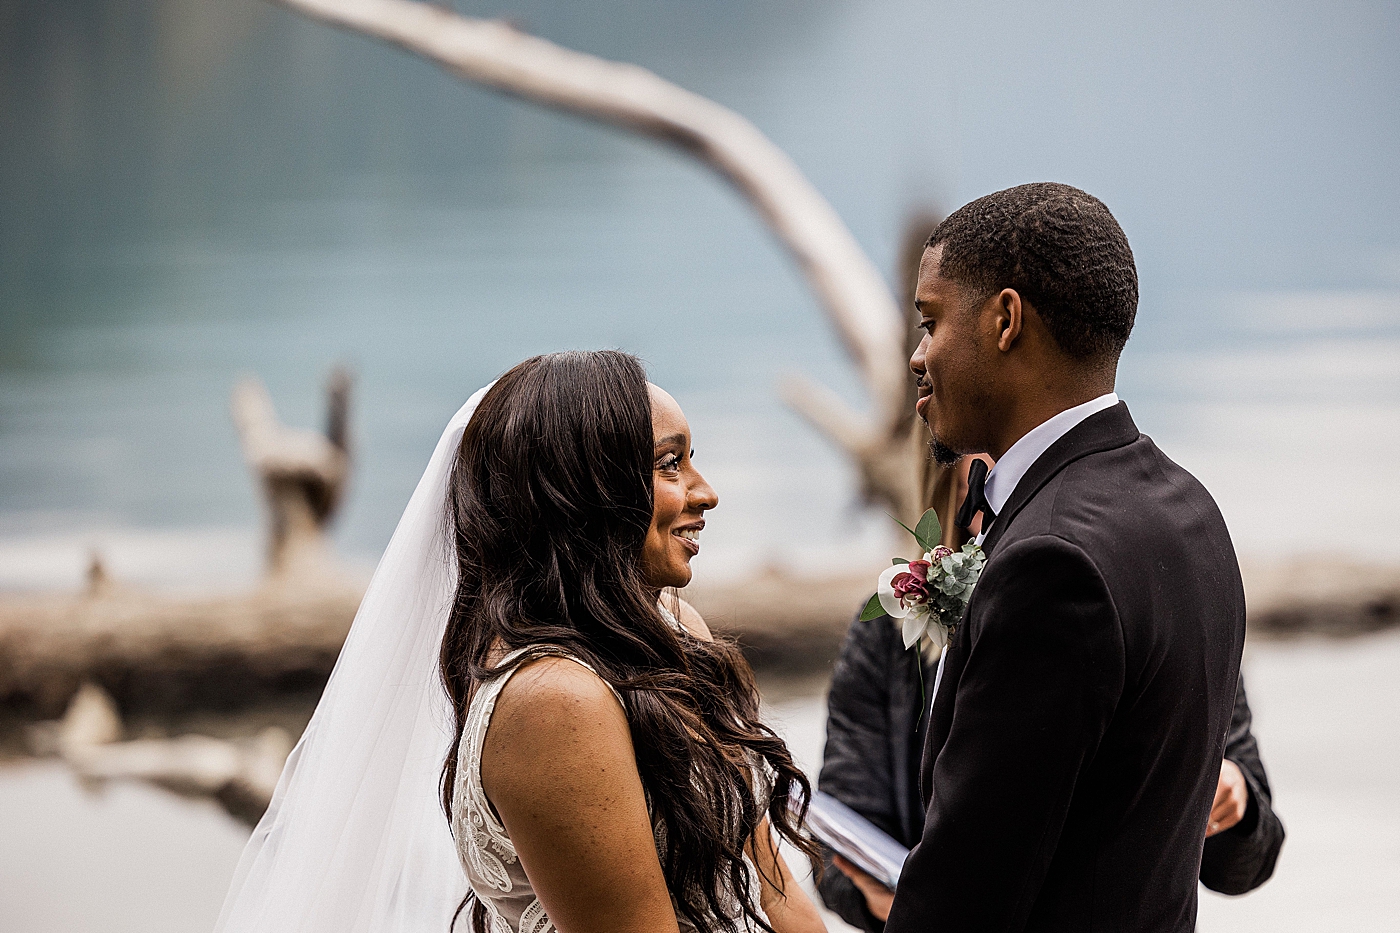 Bride and Groom smiling during vows at elopement | Photo by Megan Montalvo Photography